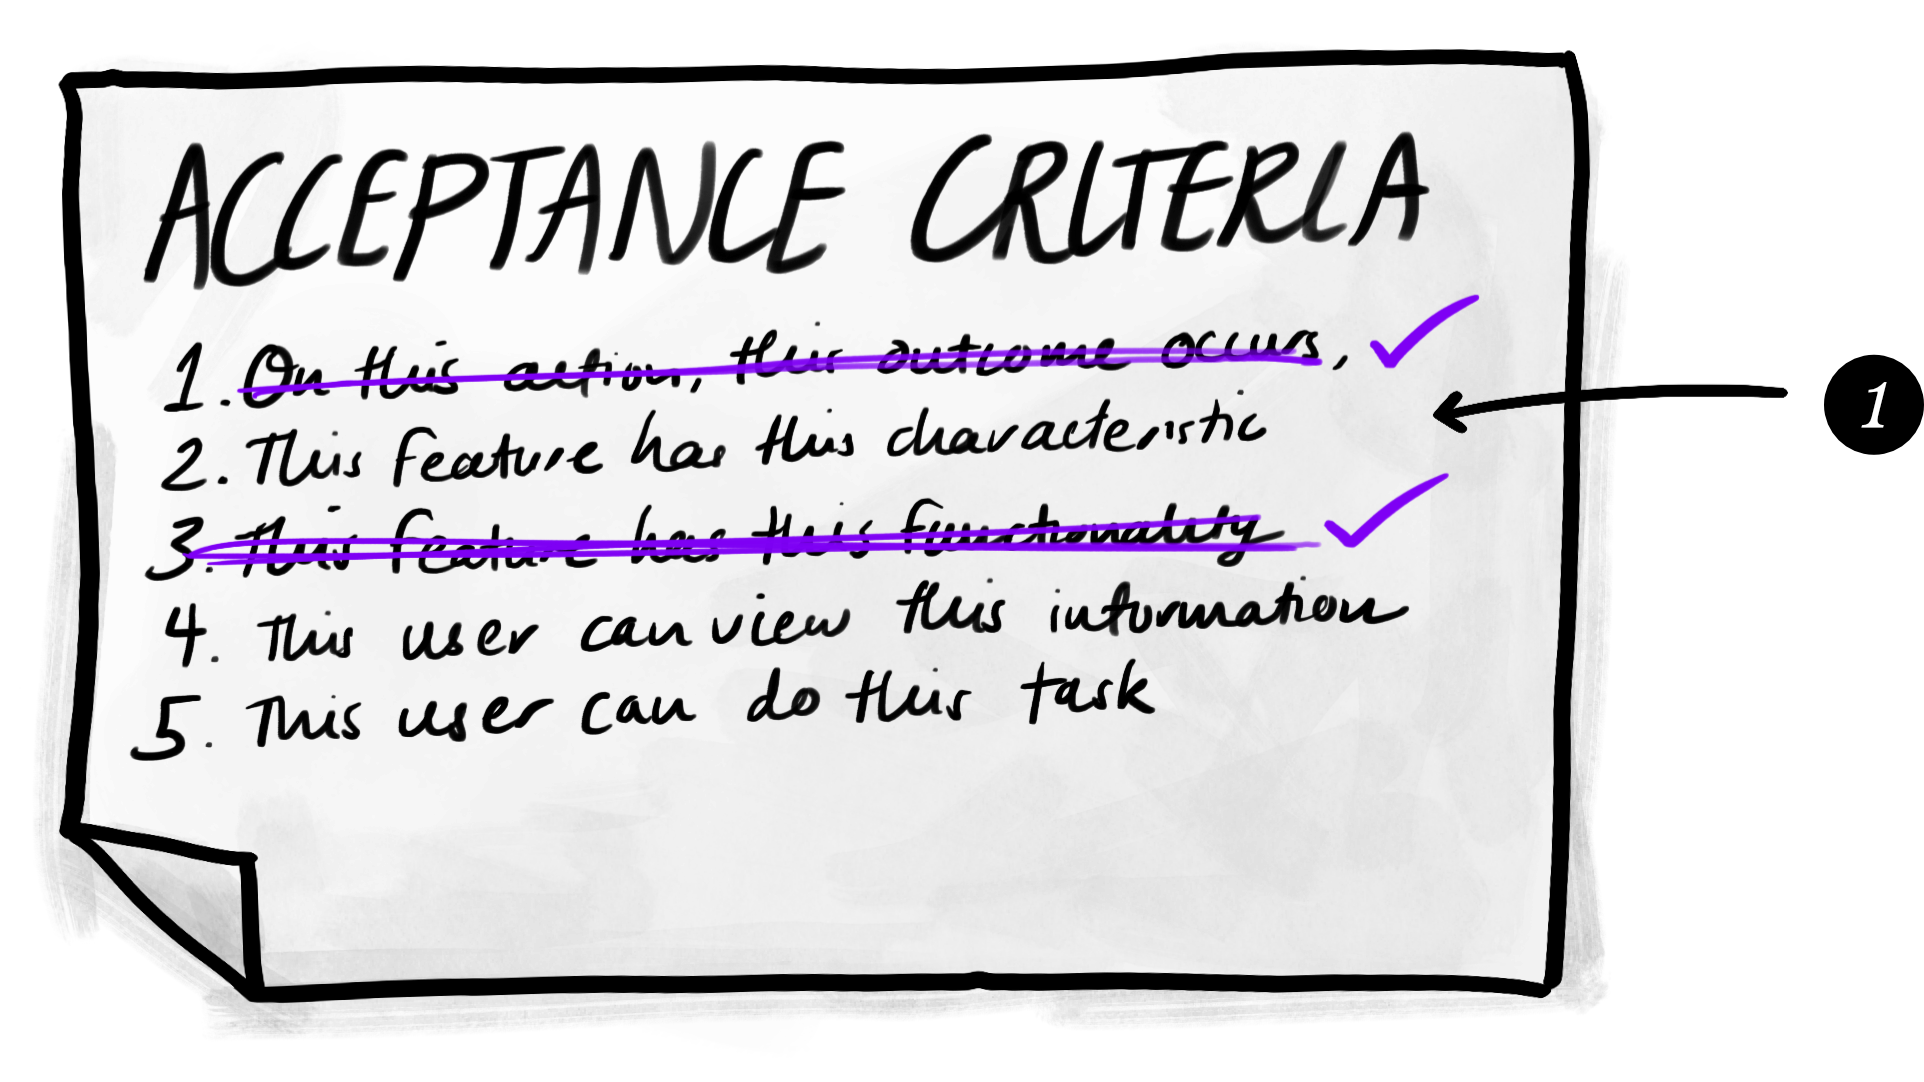 Acceptance Criteria are typically listed as on a to do list, and then checked off or crossed out as they are met.